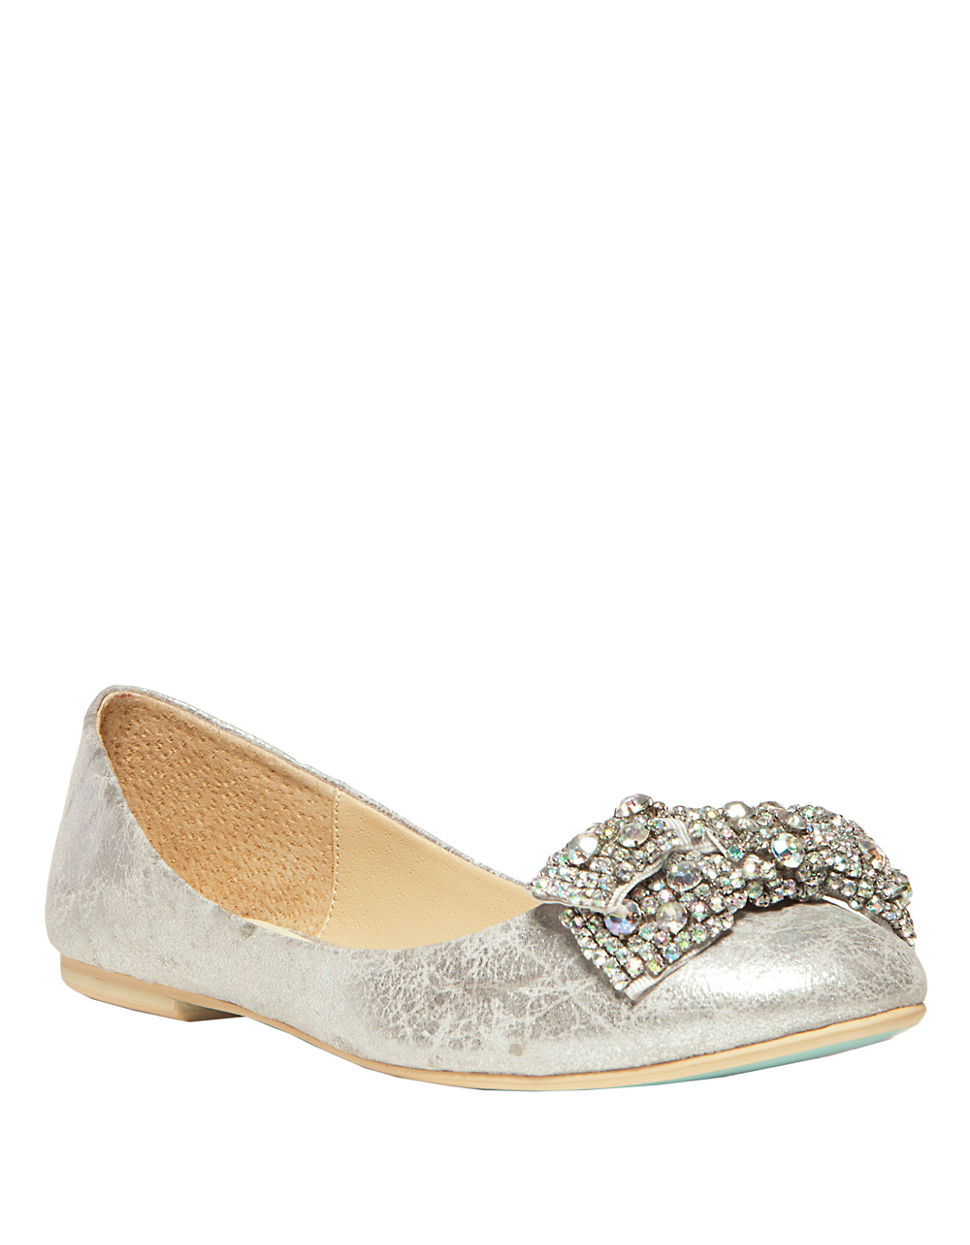 Betsey Johnson Ever Metallic Bow Flats in Silver | Lyst